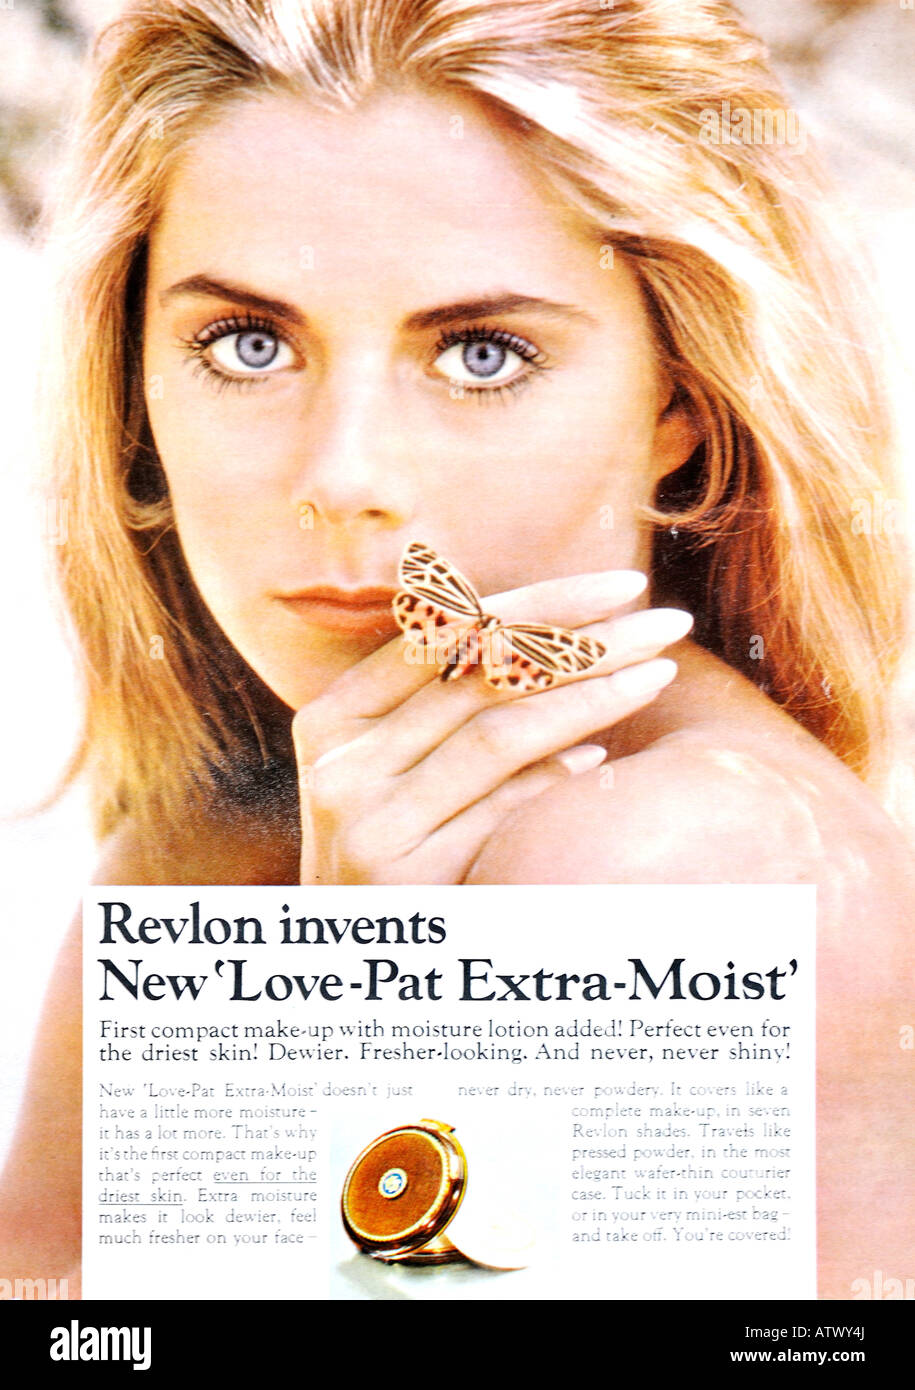 1960s Nova Magazine October 1968 Advertisement for Love-Pat Extra-Moist compact make-up FOR EDITORIAL USE ONLY Stock Photo